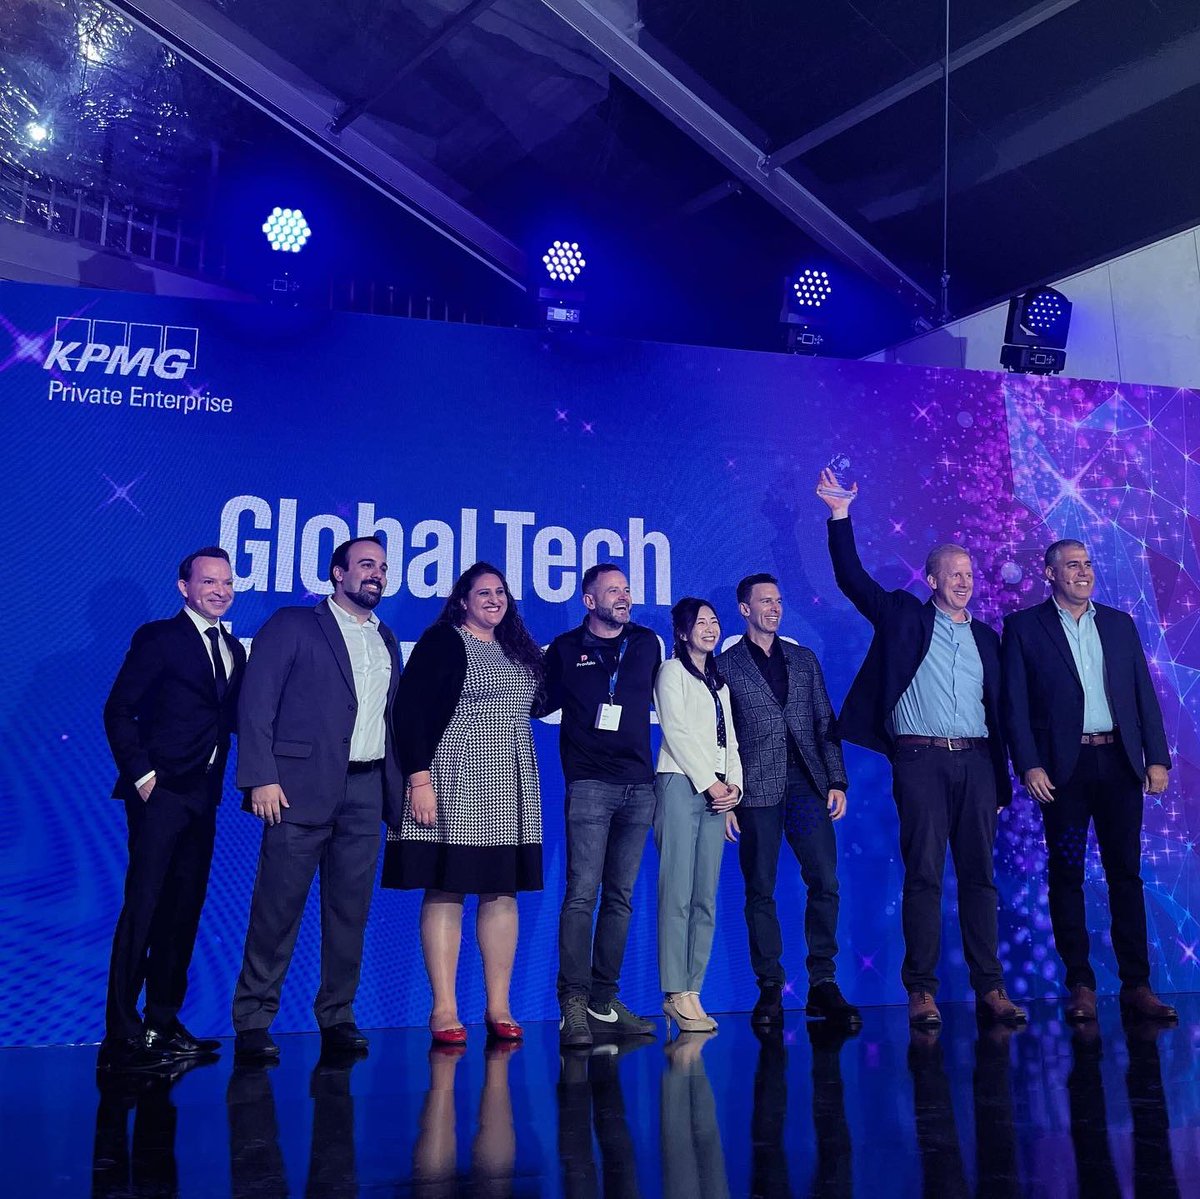 From 1,200 applications to 17 country finals later, last week in Lisbon we named the 2022 @KPMG Private Enterprise #GlobalTechInnovator. The competition showcases entrepreneurs across industries who are innovating to become tech leaders of tomorrow. Congratulations, @Hii_ROC!